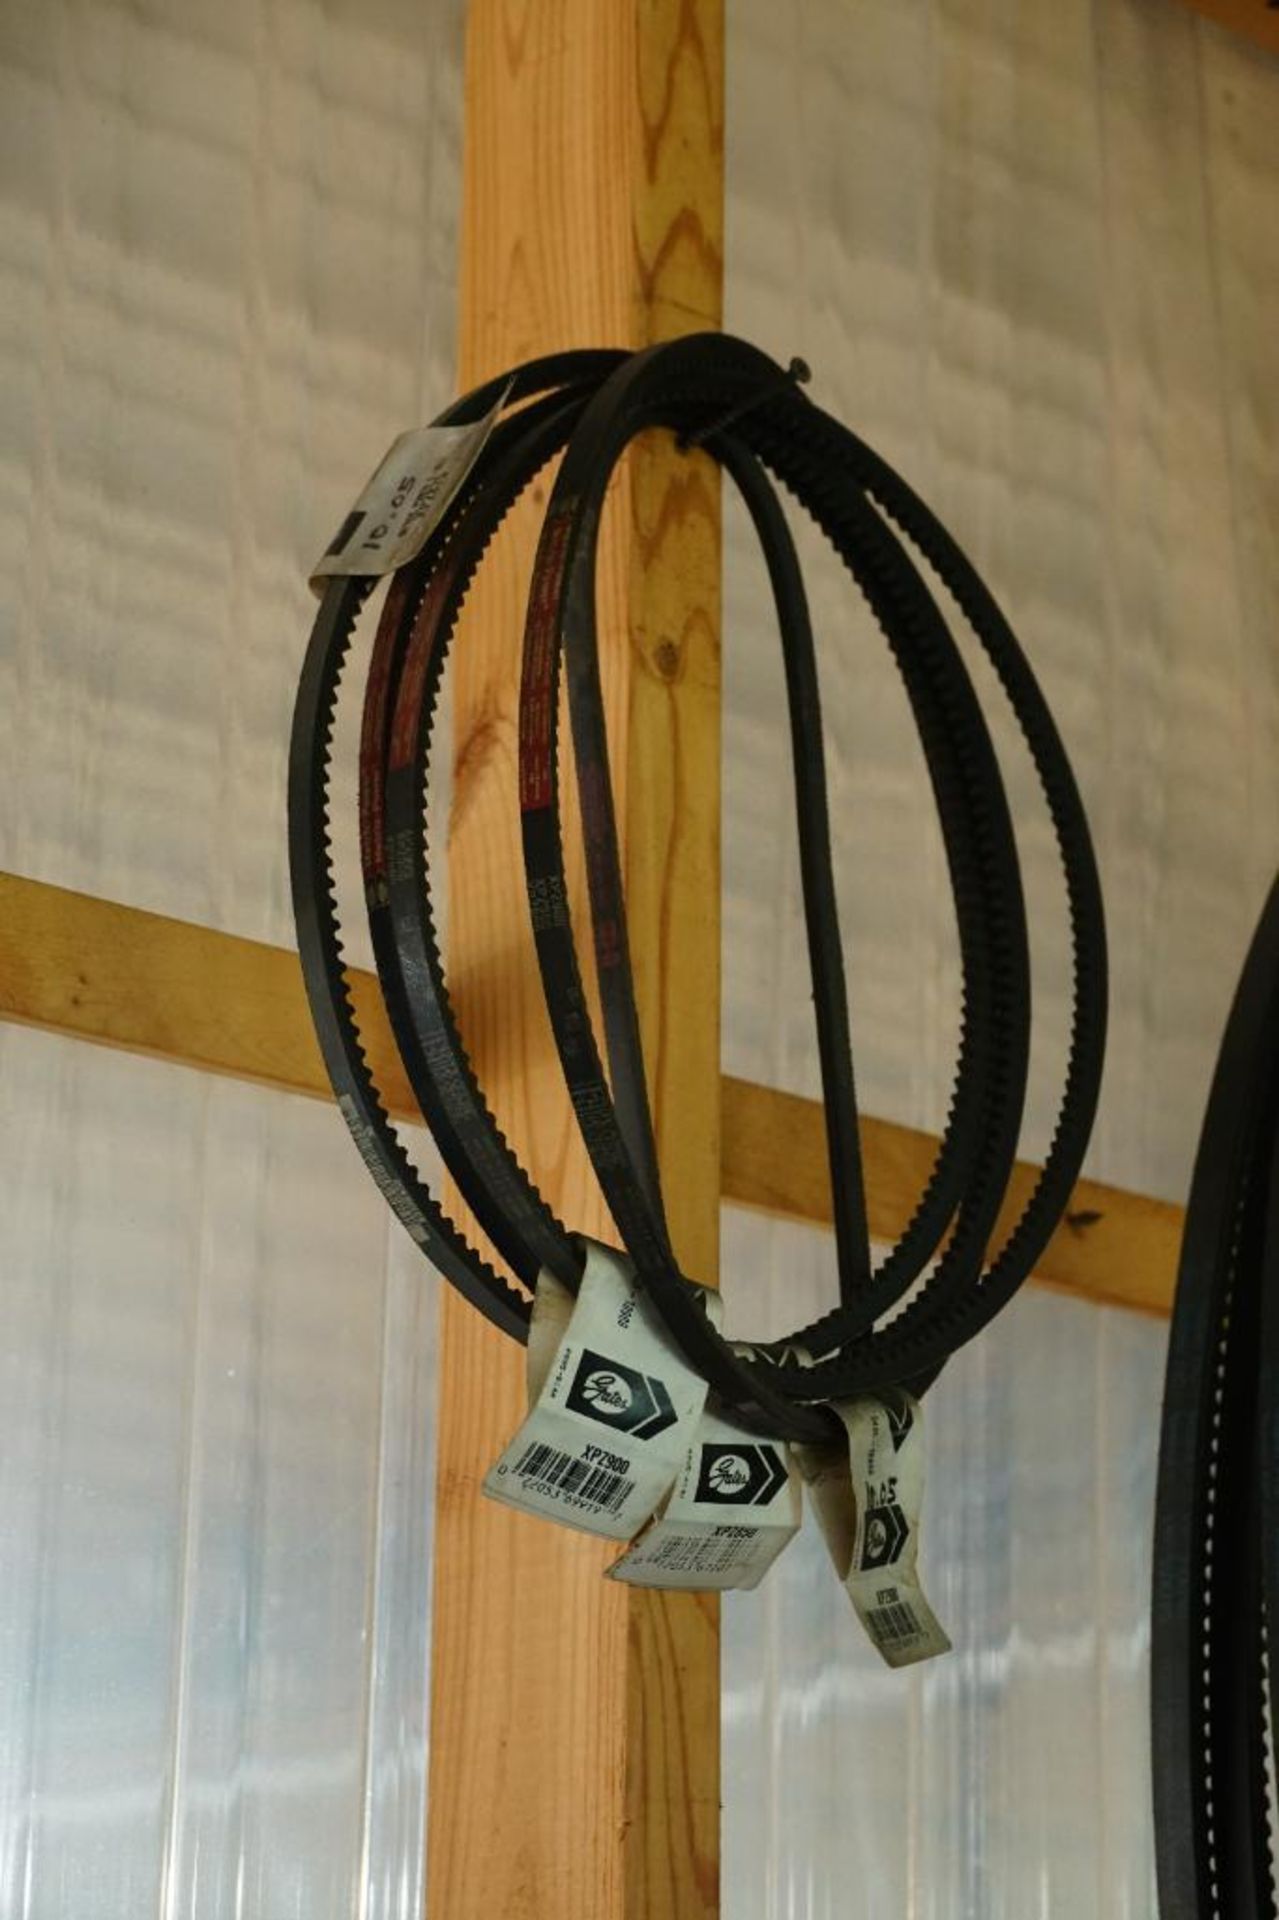 Copper Tubing and V Belts on Wall - Image 8 of 11